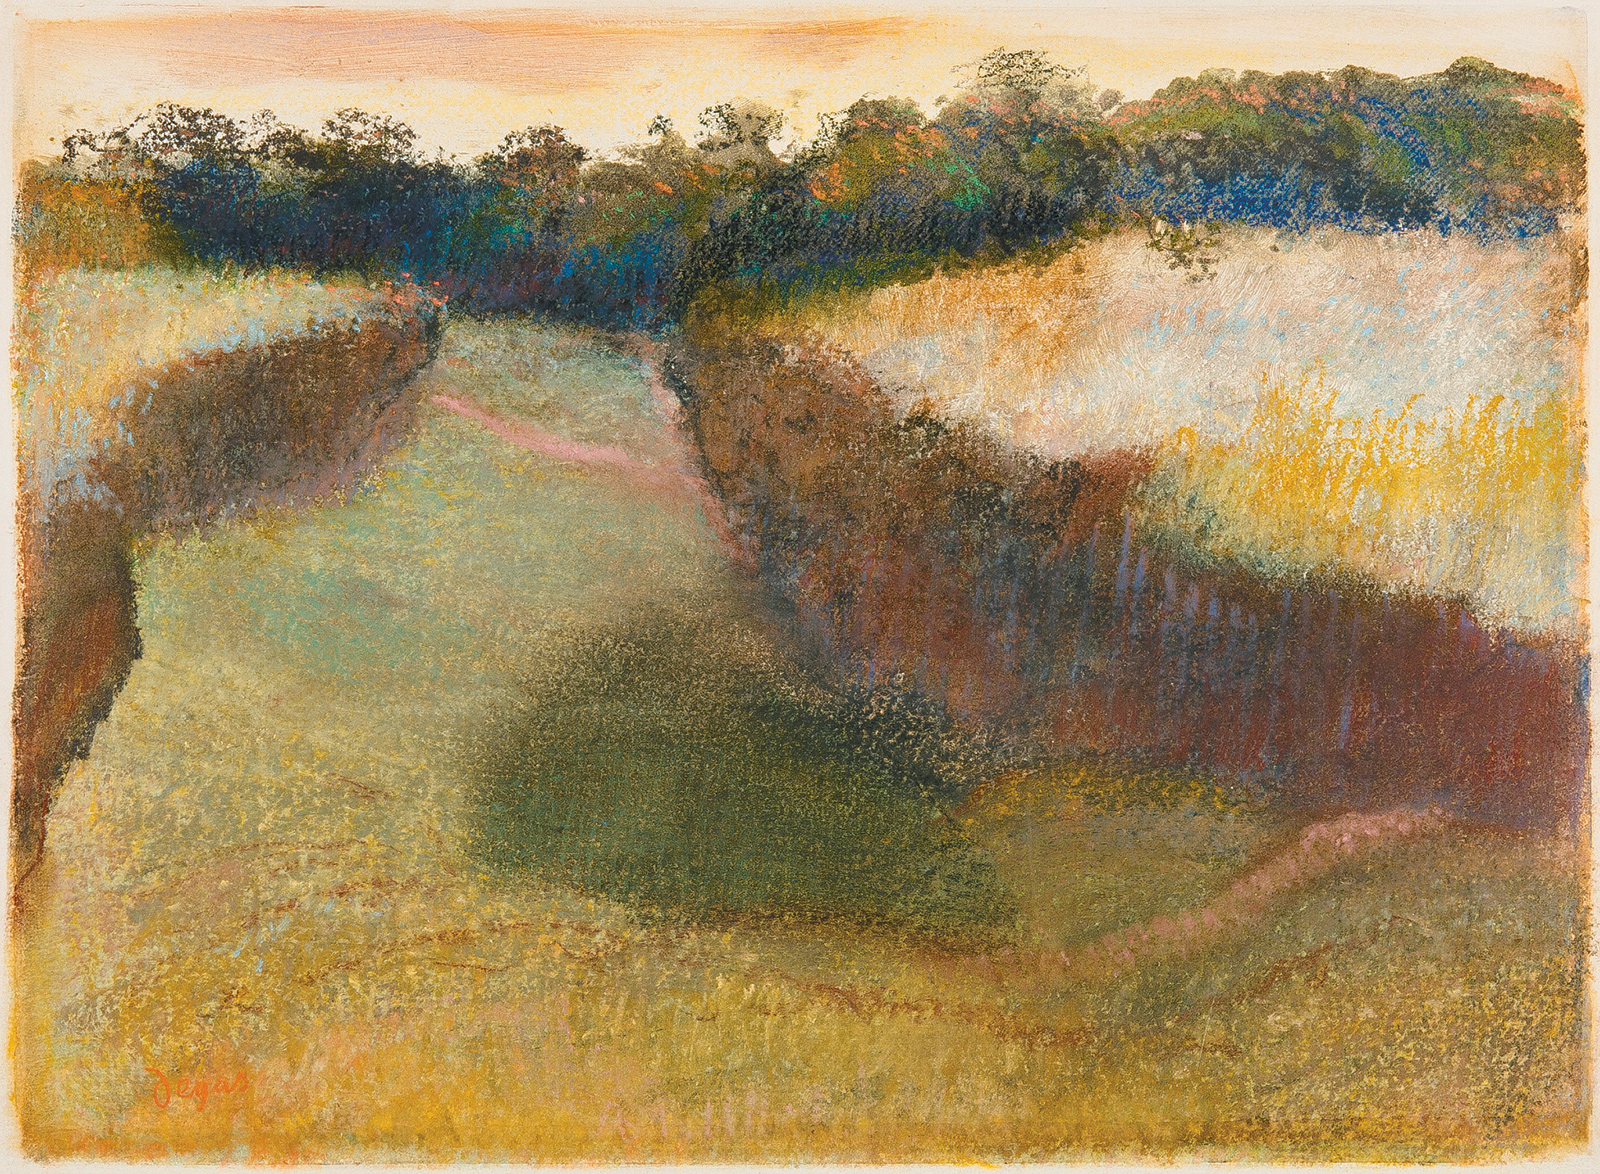 Edgar Degas: Wheatfield and Line of Trees, pastel over monotype in oil on paper, 1890